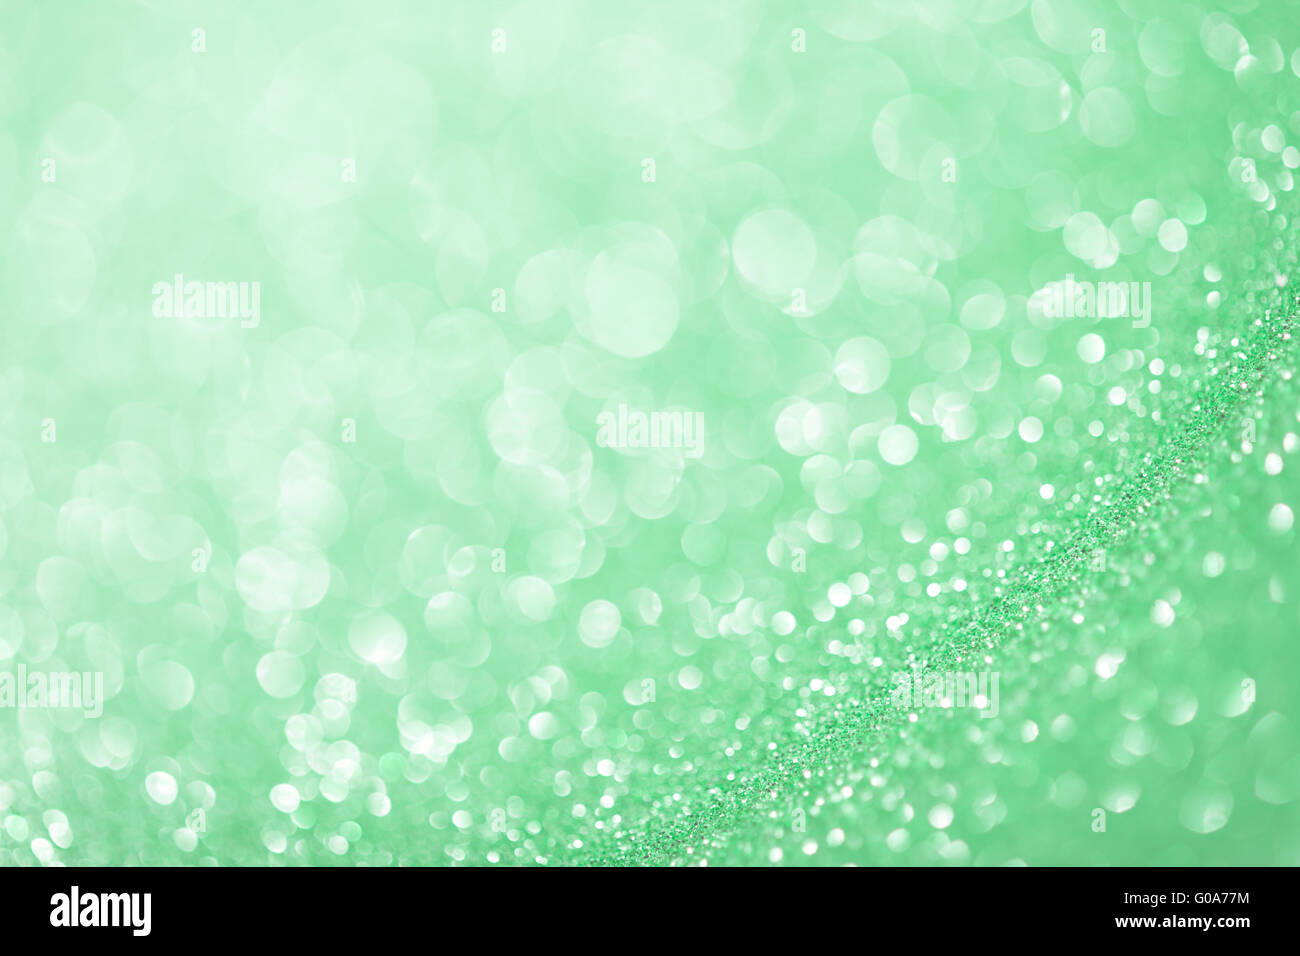 Beautiful festive abstract background with a small depth of field Stock Photo